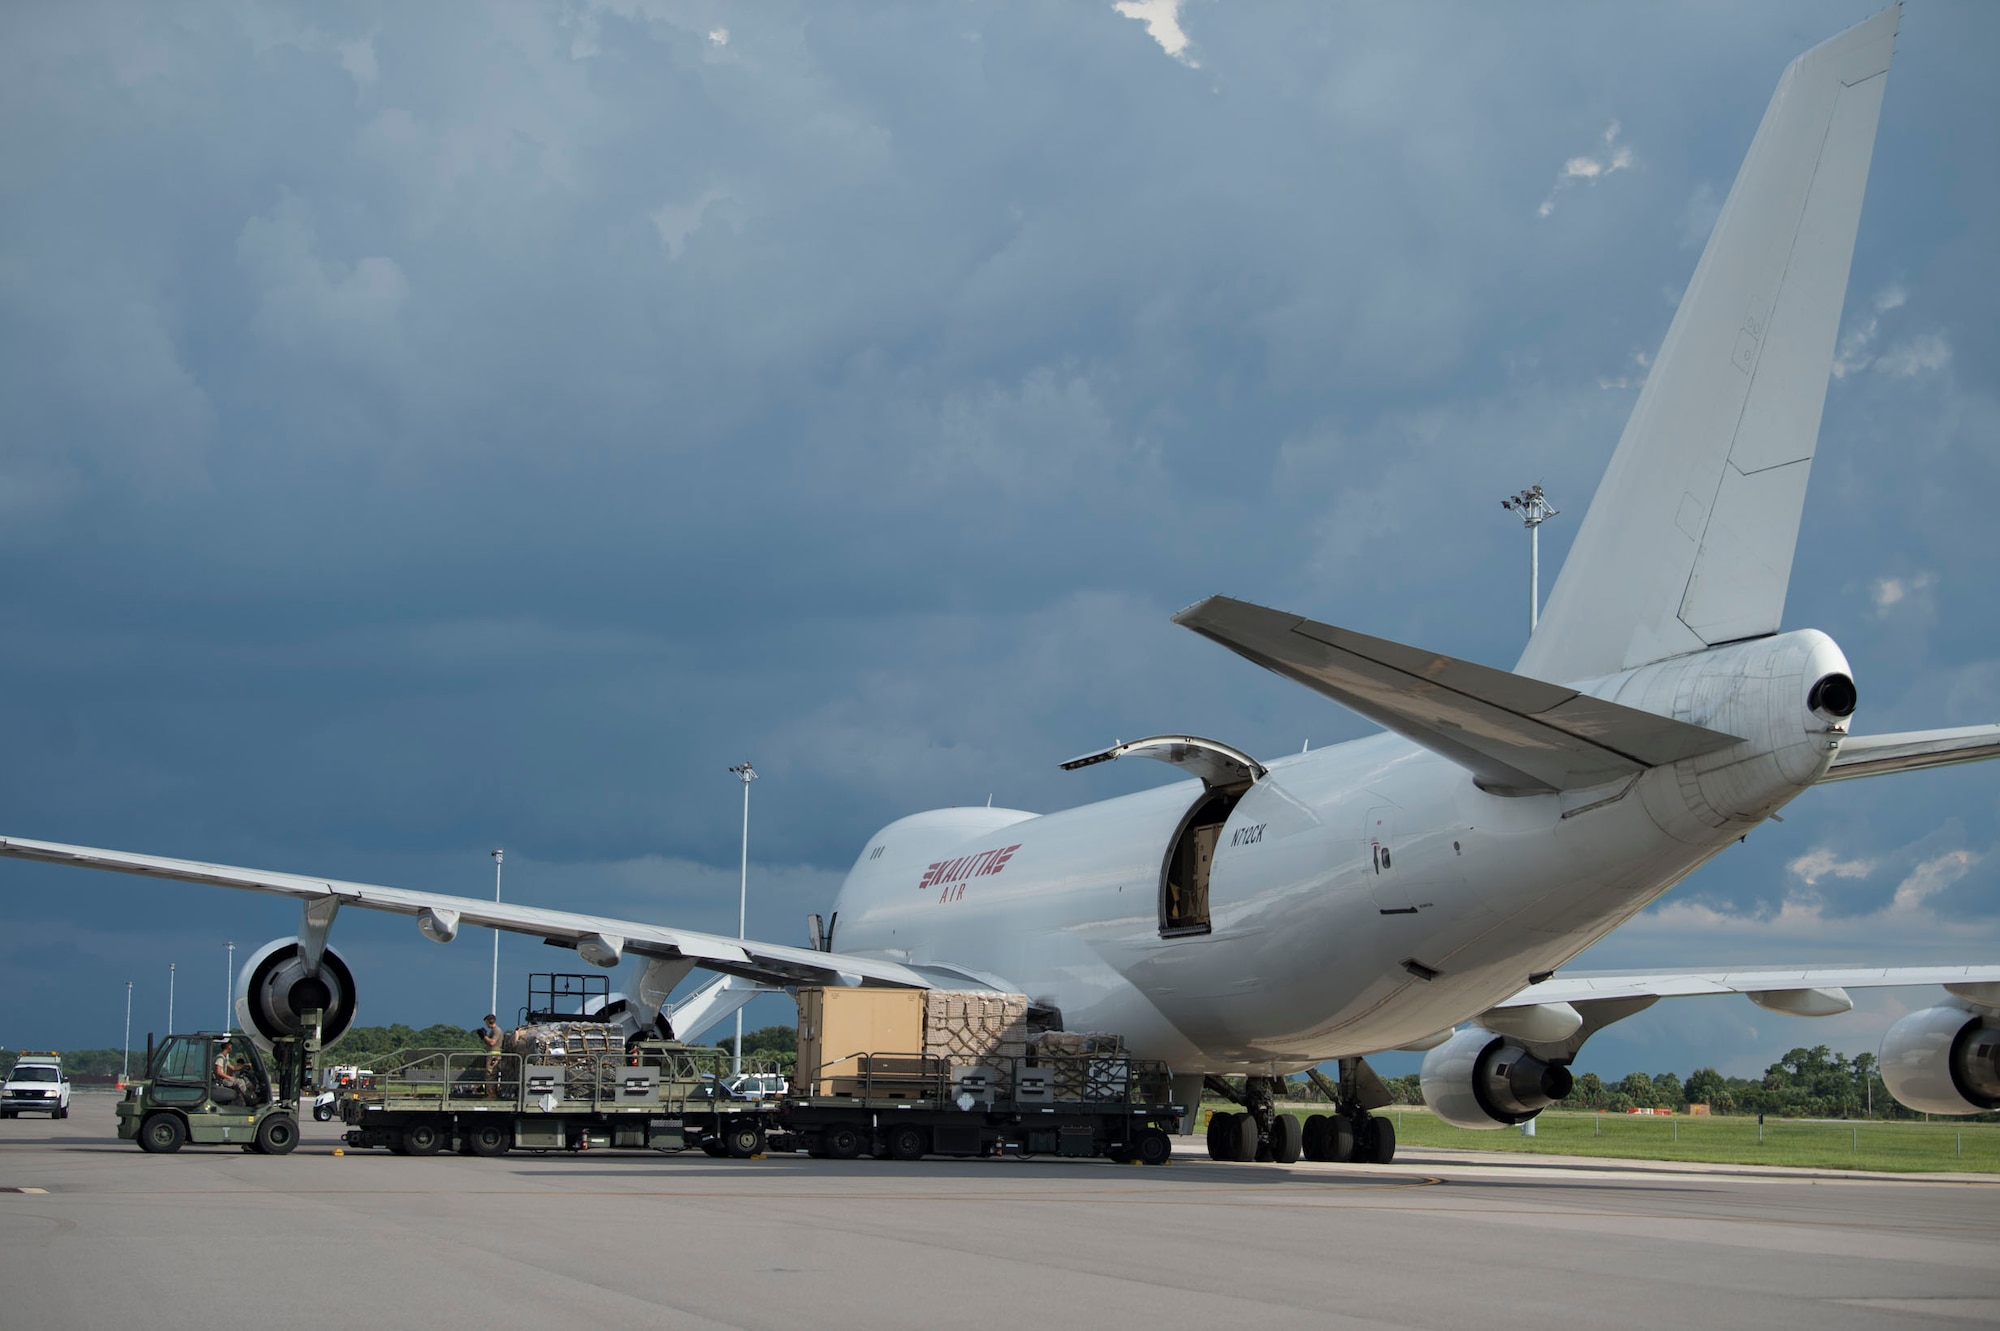 Members of the 6th Logistics Readiness Squadron remove pallets and crates of cargo from a Boeing 747 at MacDill Air Force Base, Fla., July 31, 2019. The team removed 32 increments of cargo which weighed a total of 144,470 pounds of Joint Communications Support Element’s deployed equipment. (U.S. Air Force photo by Senior Airman Adam R. Shanks)